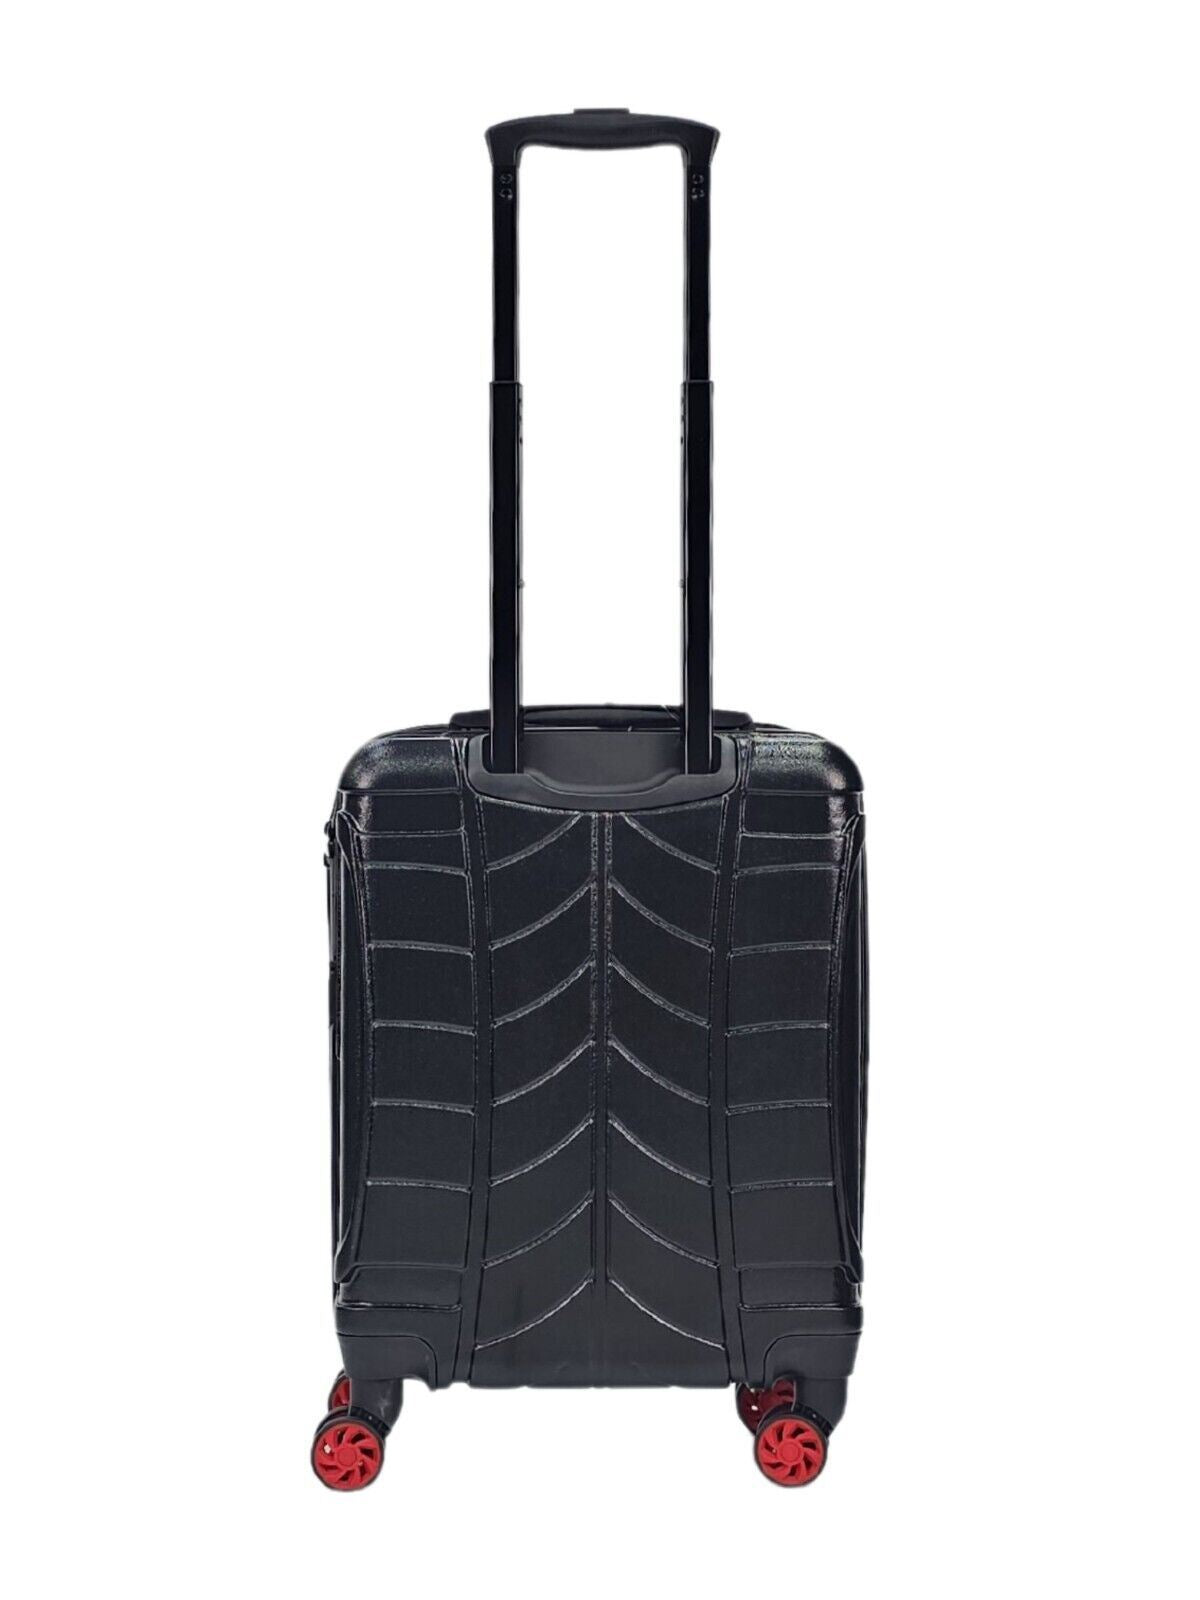 Hard Shell Cabin Suitcase 4 Wheel Luggage Travel Bag - Upperclass Fashions 